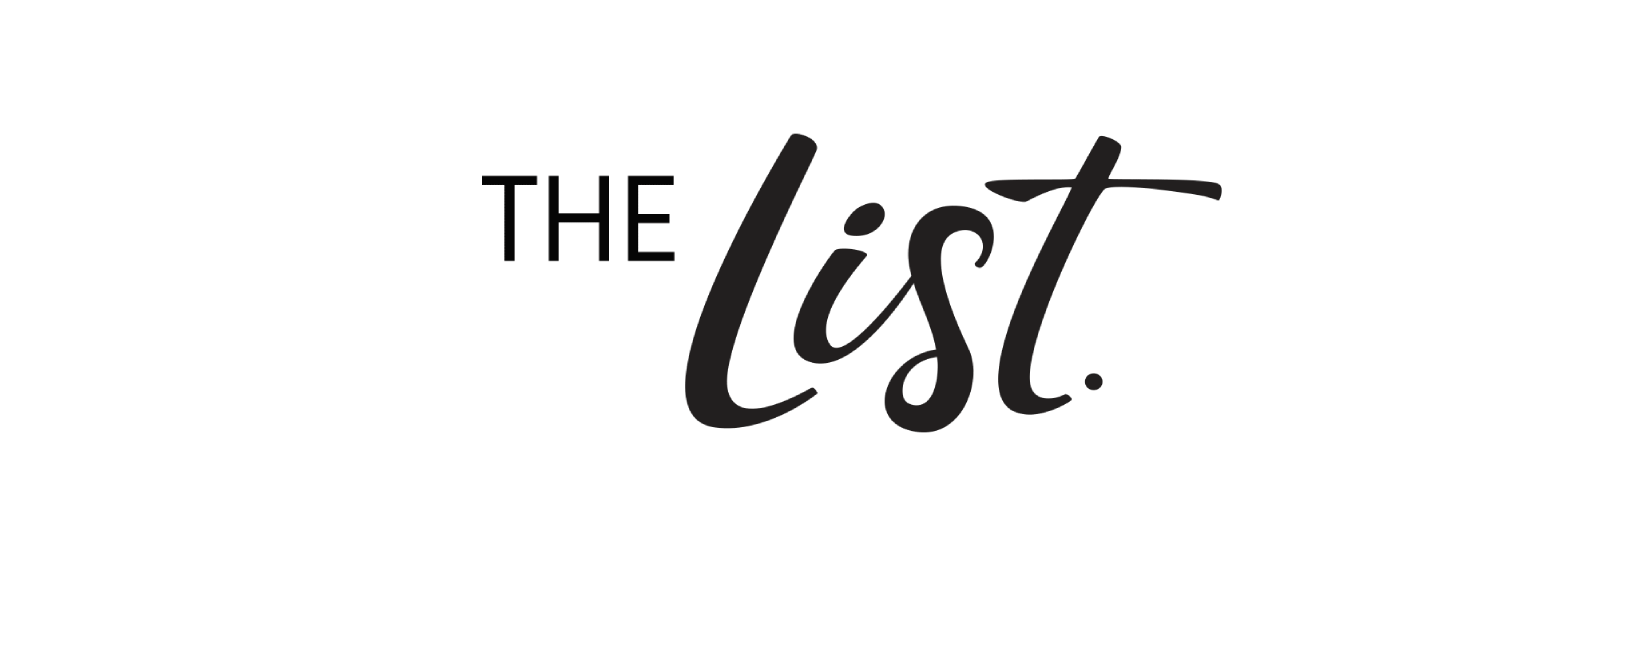 THE LIST Discount Code 2022